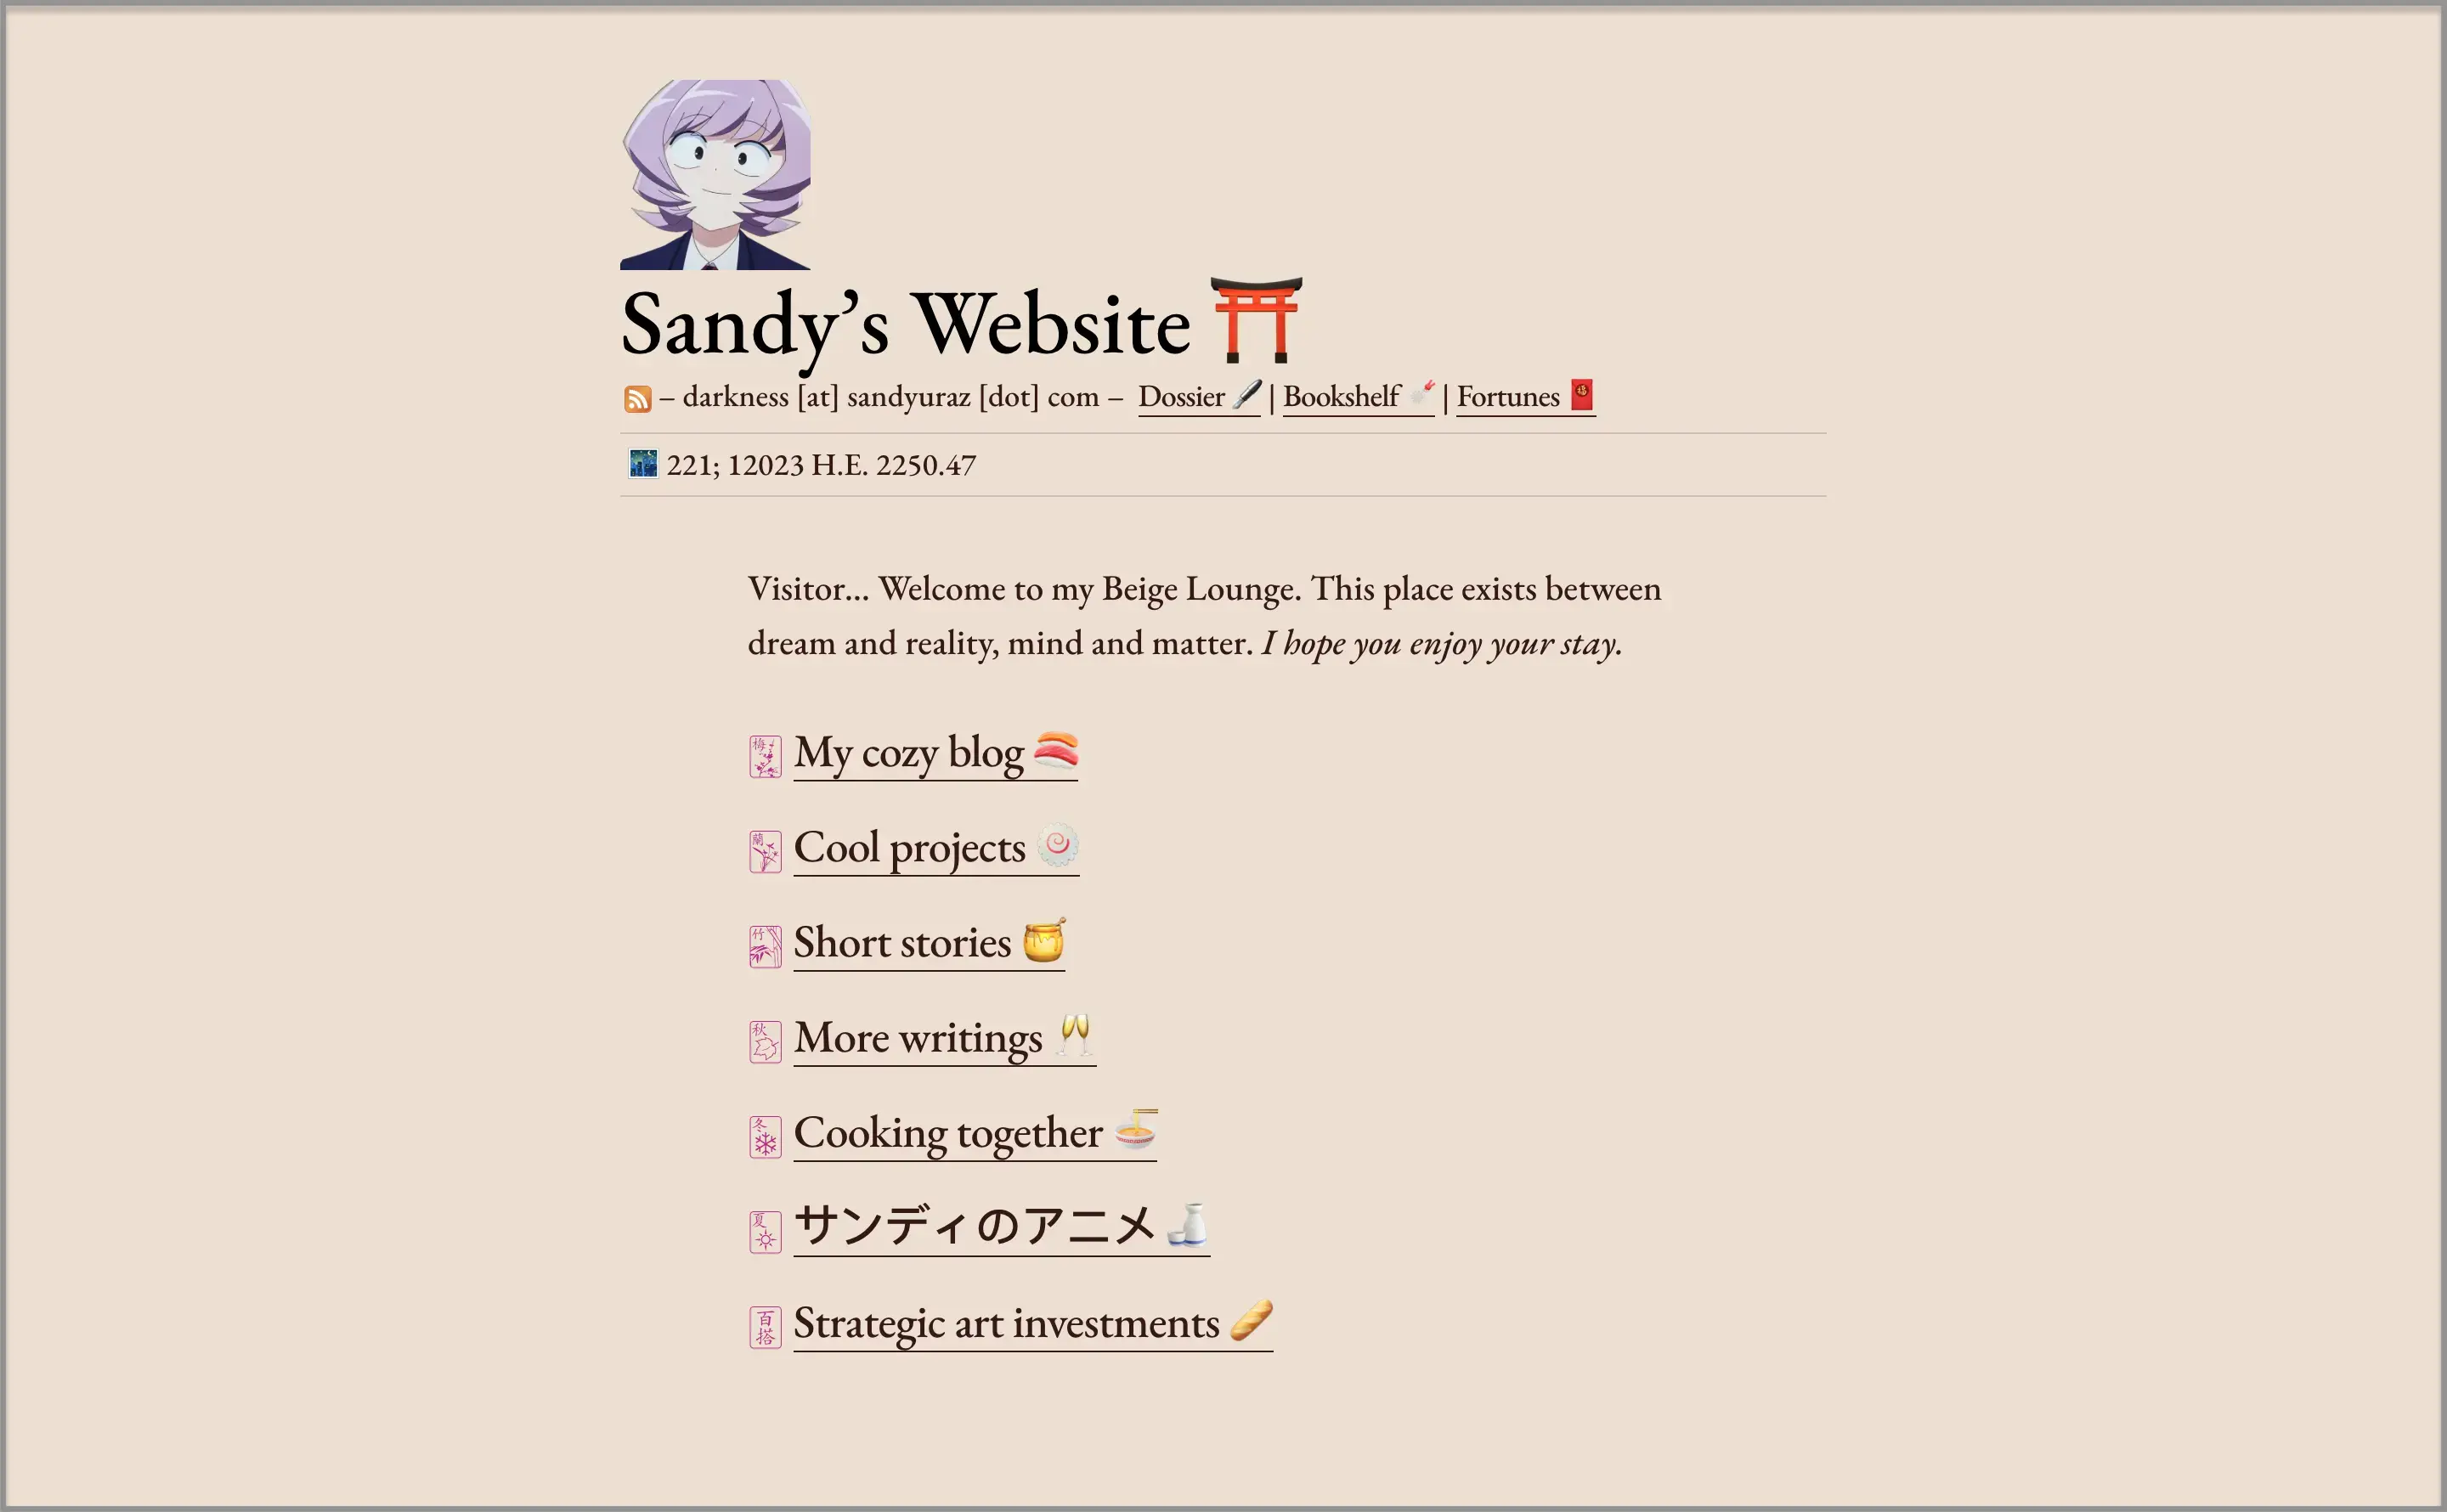 The homepage with the new color scheme